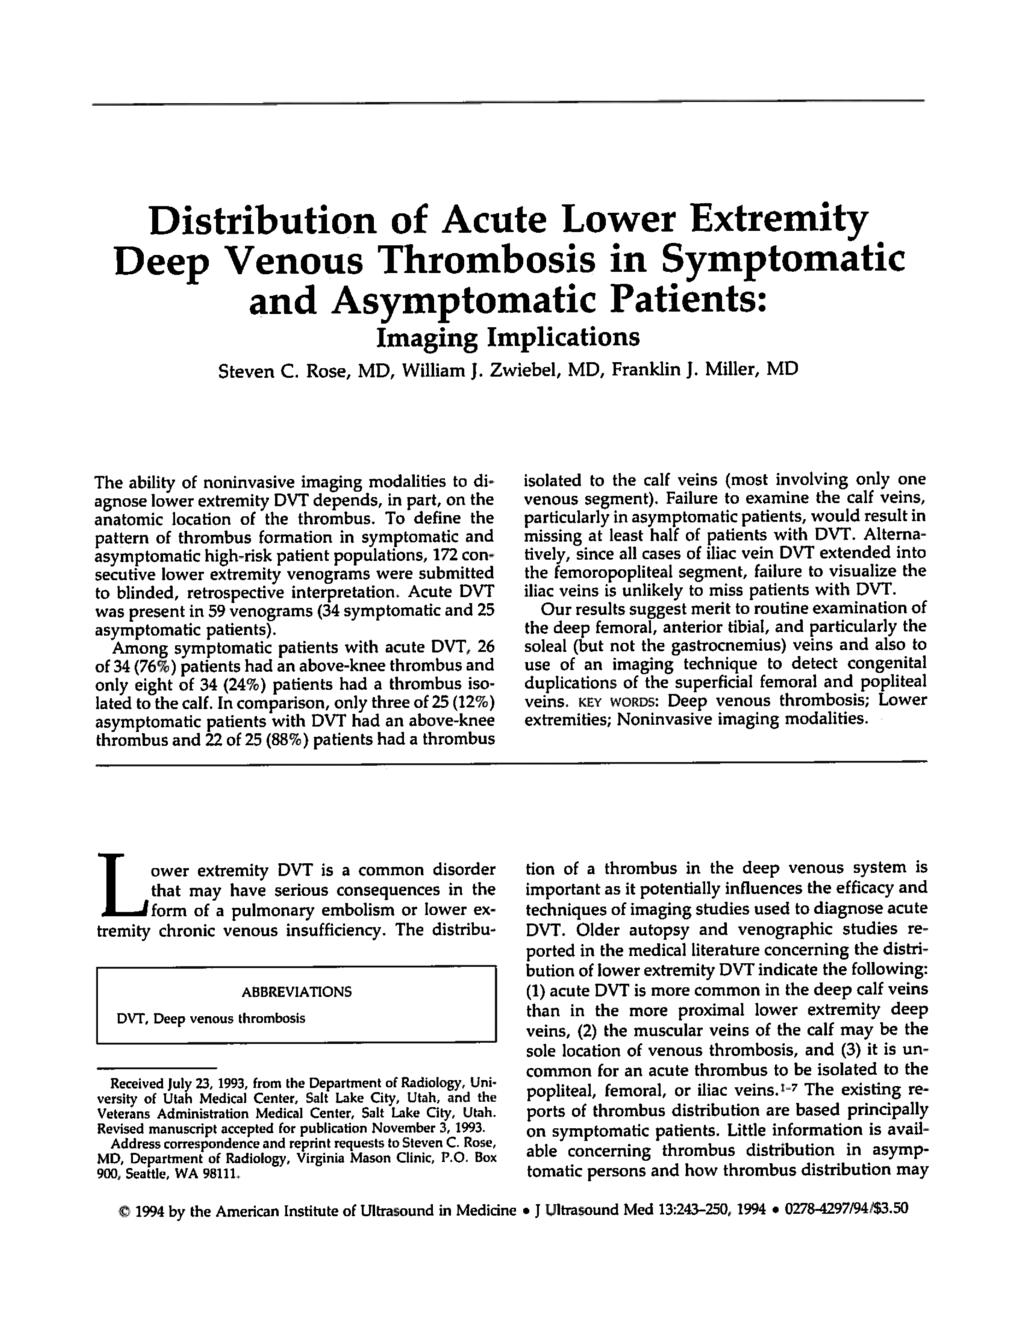 Distribution of Acute Lower Extremity Deep Venous Thrombosis in Symptomatic and Asymptomatic Patients: Imaging Implications Steven C. Rose, MD, William J. Zwiebel, MD, Franklin J.